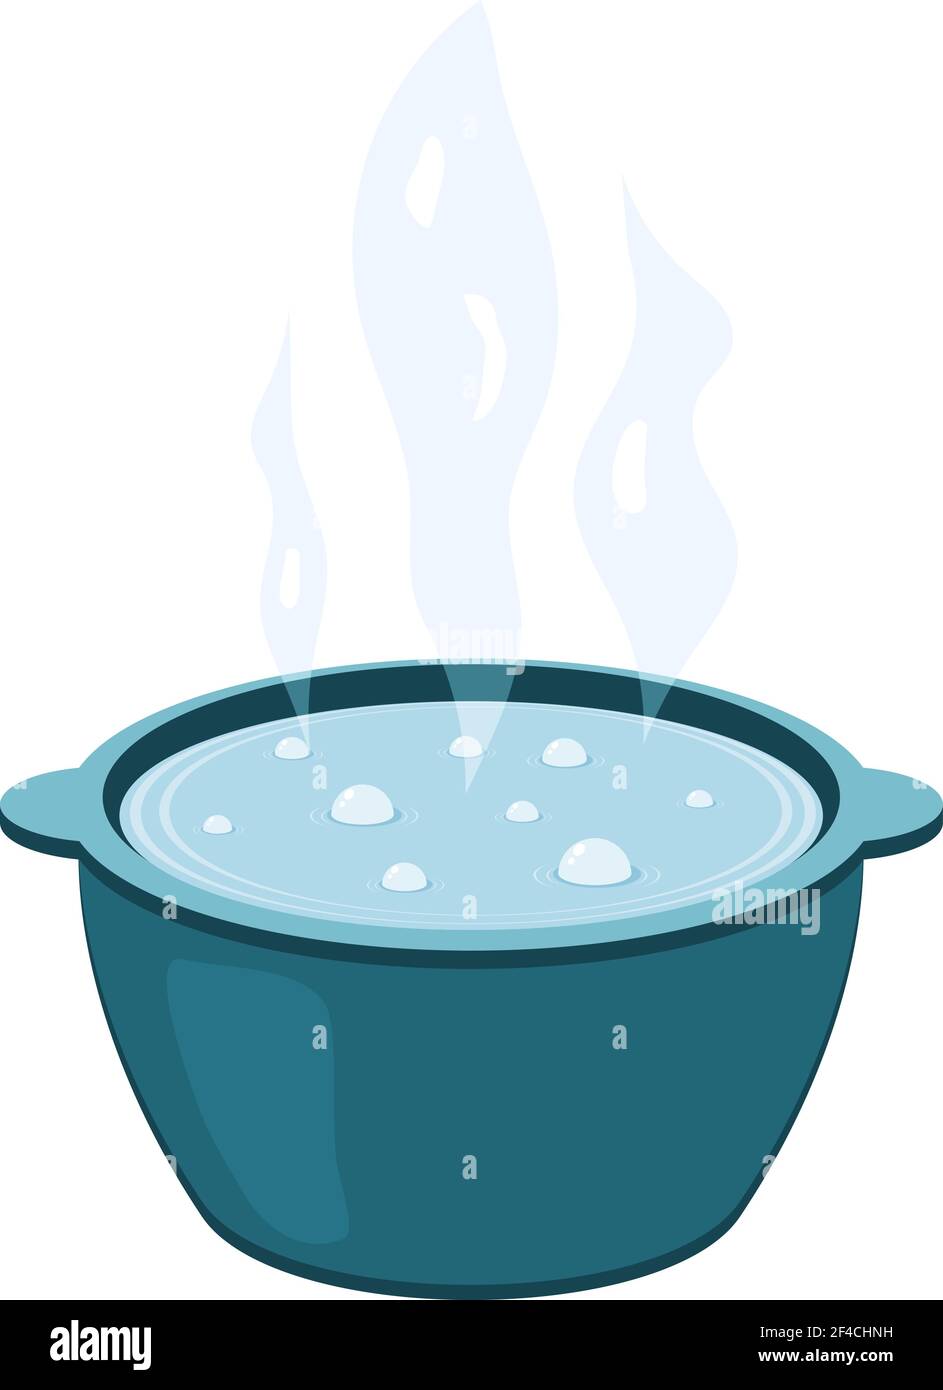 https://c8.alamy.com/comp/2F4CHNH/vector-illustration-of-a-metal-pot-with-boiling-water-cooking-food-cartoon-kettle-with-steam-on-a-white-background-2F4CHNH.jpg